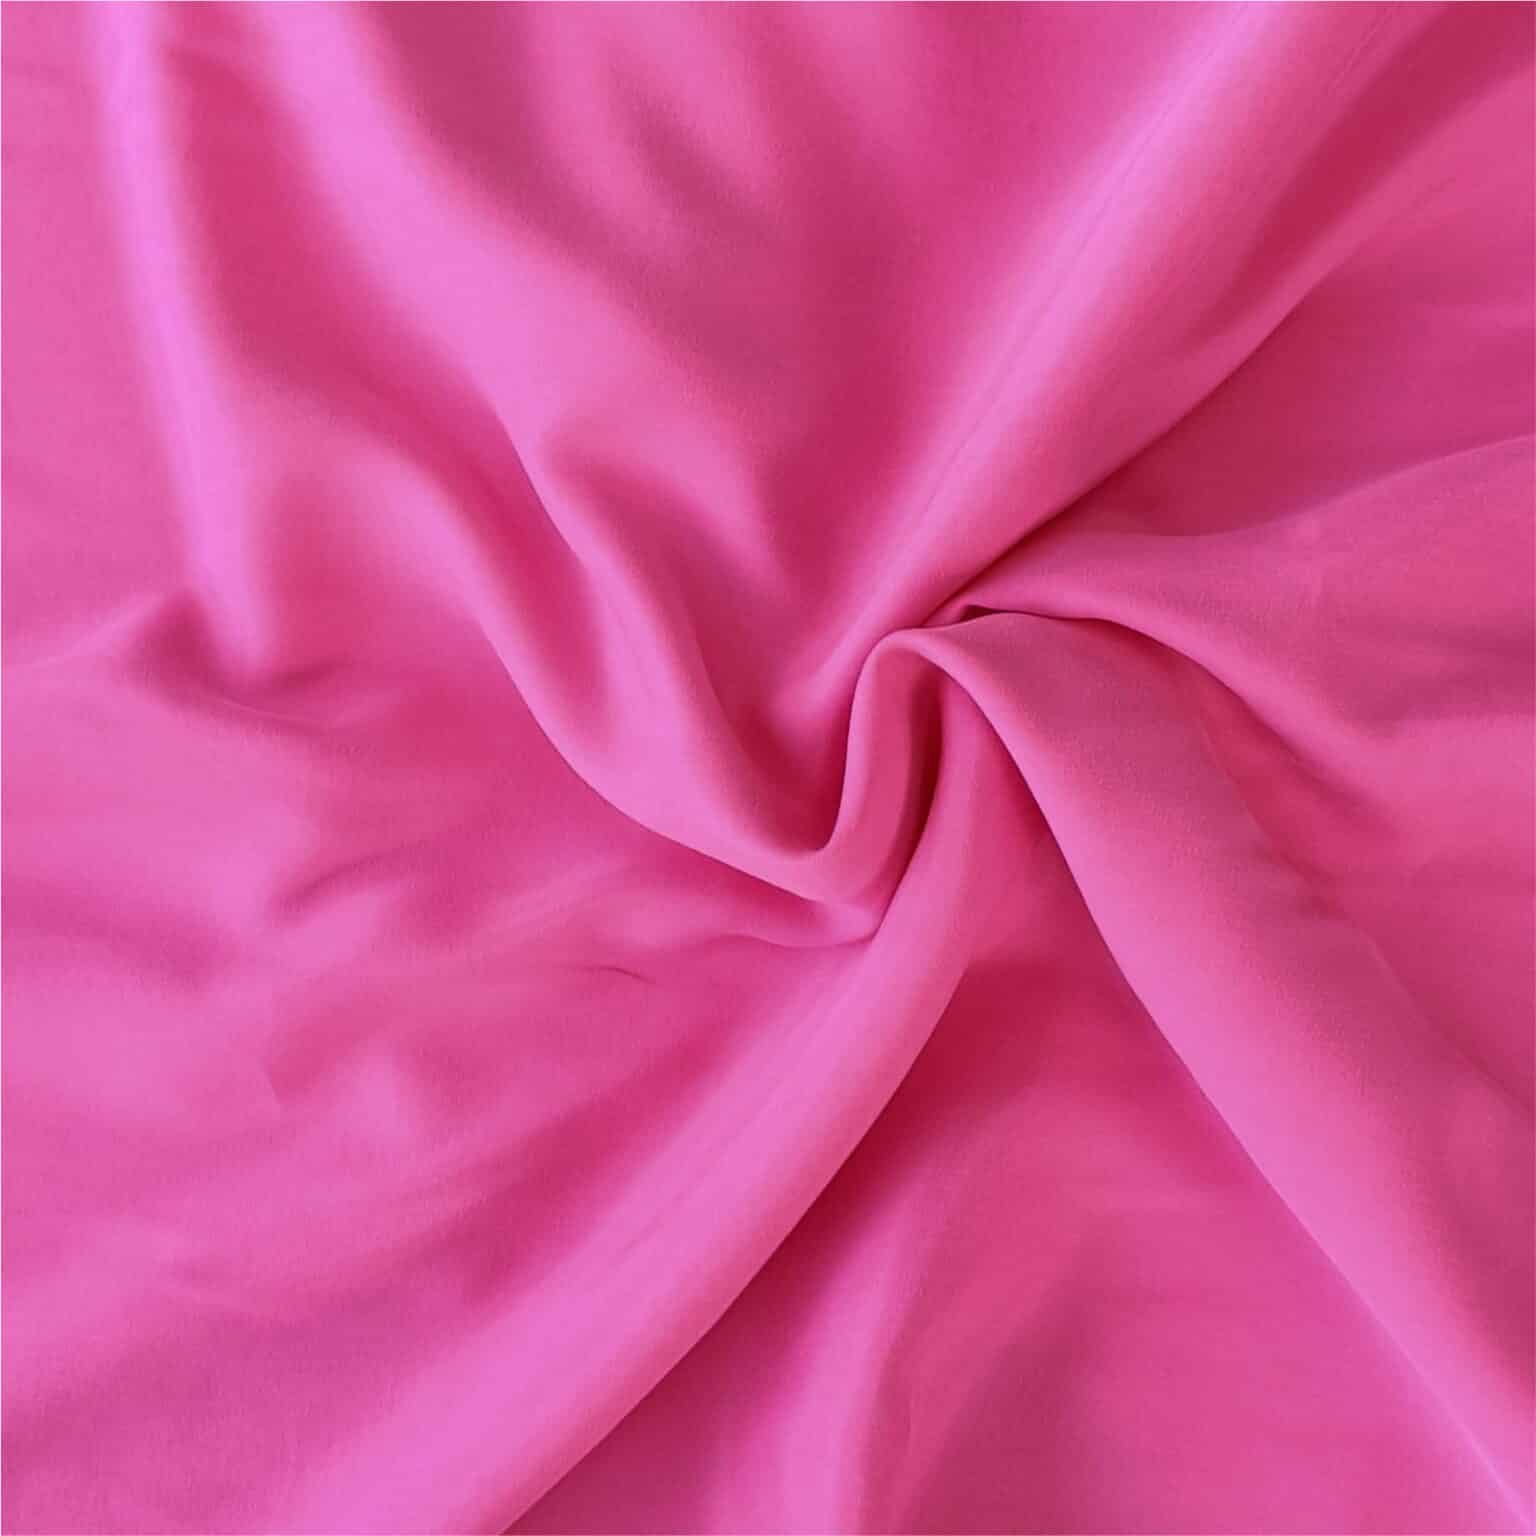 Fuchsia Pink Soft Touch Lyocell fabric | More Sewing